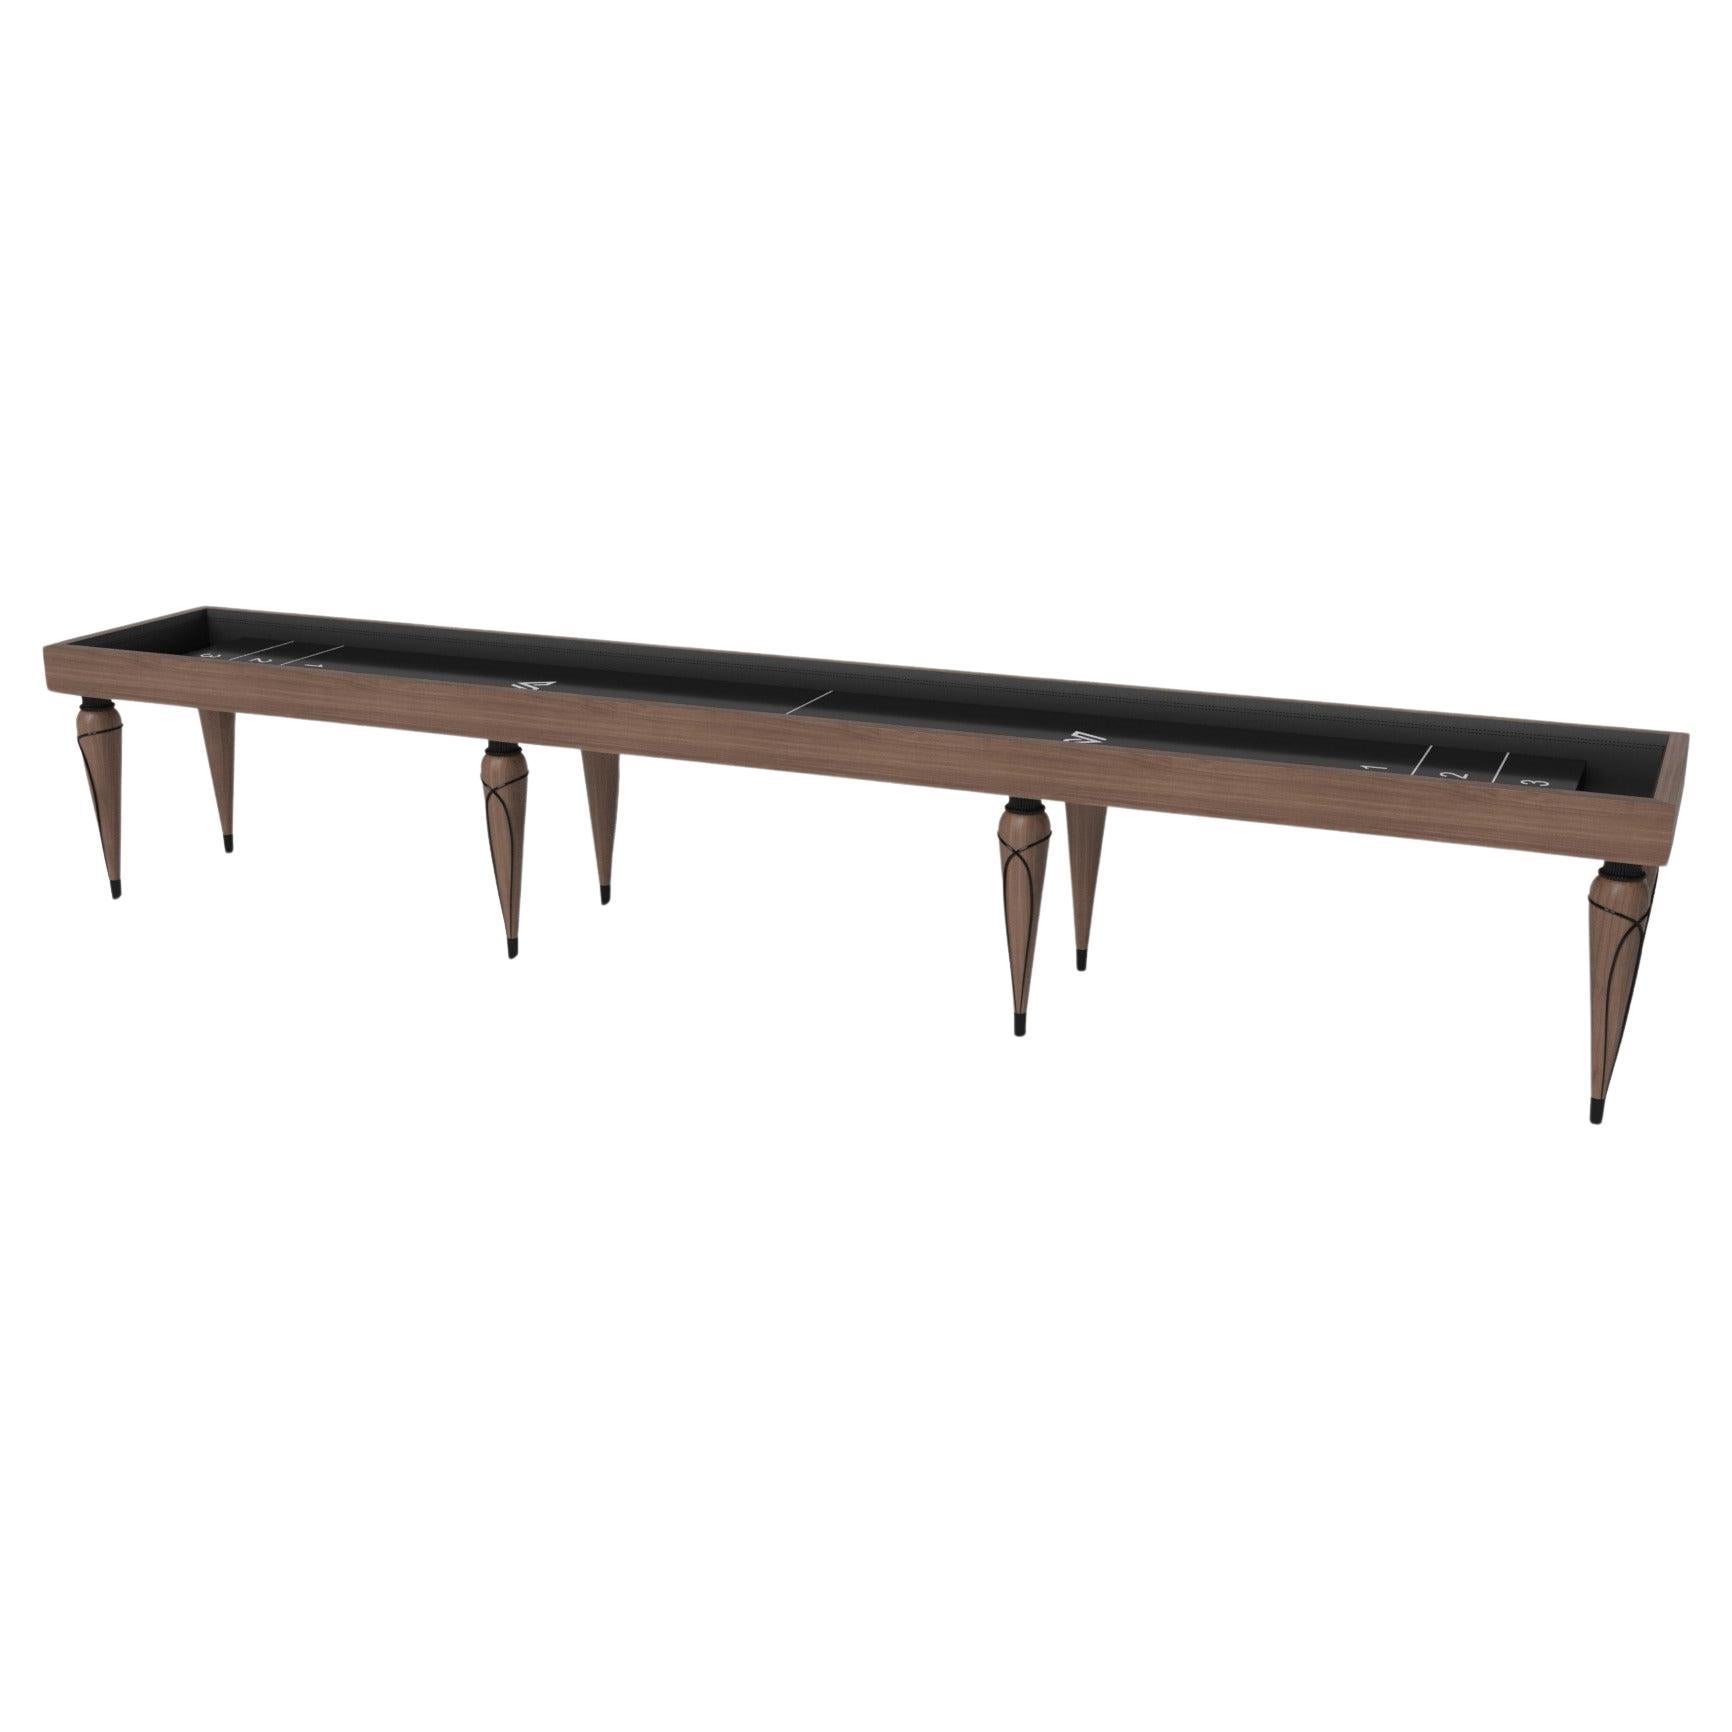 Elevate Customs Don Shuffleboard Tables / Solid Walnut Wood in 16' - USA